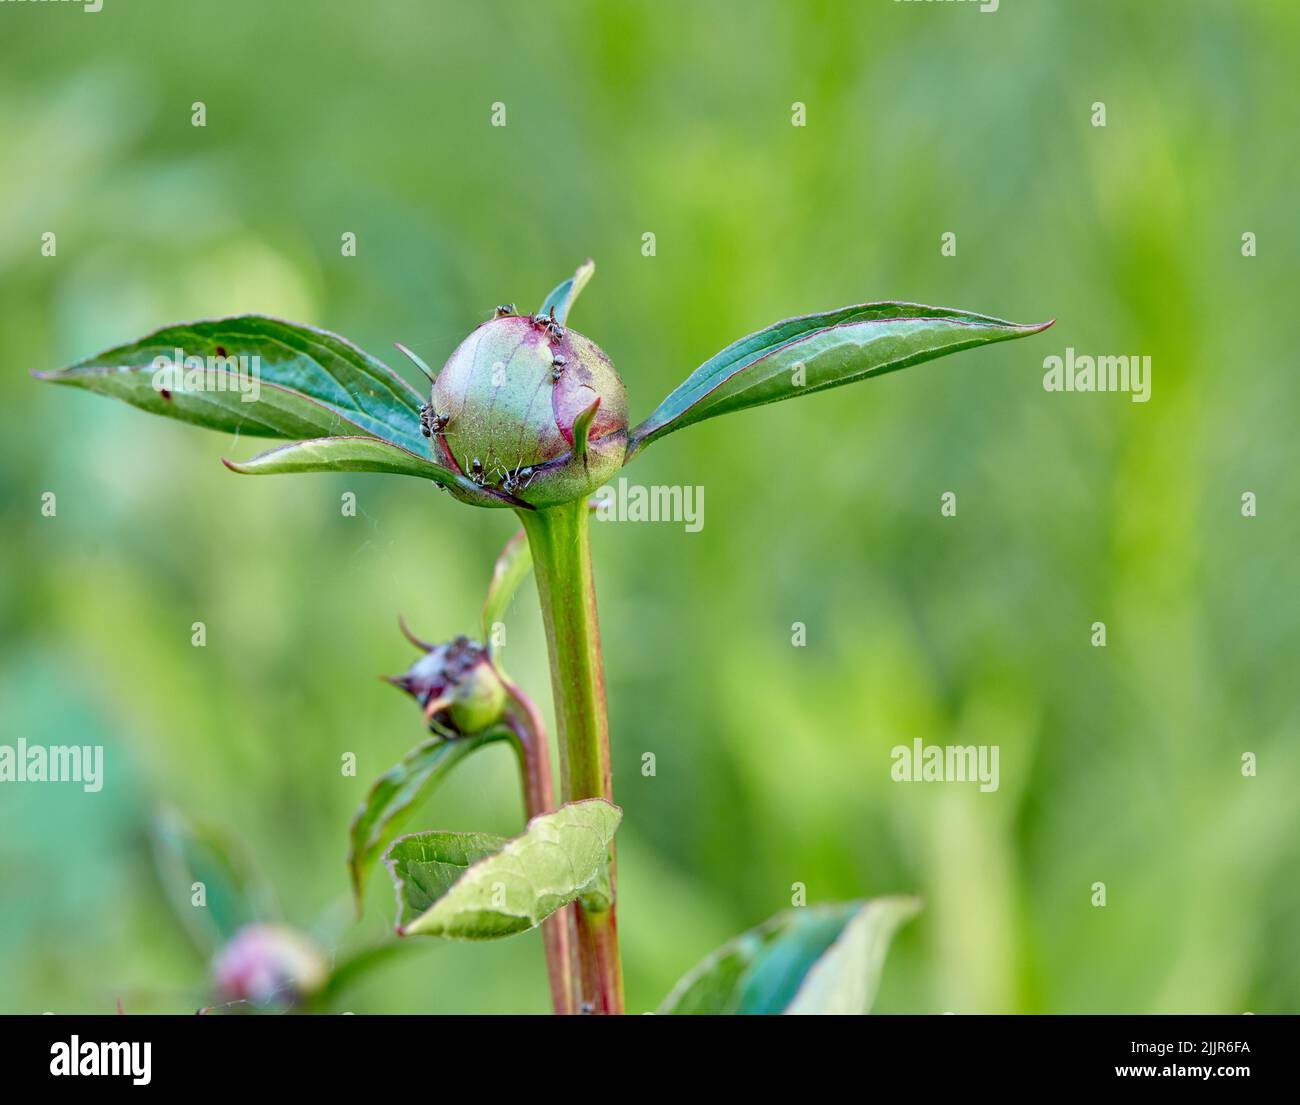 Budding, sprouting and blooming flowers growing in a garden or nature park. Closeup of peony flowering plant with green leaves maturing outdoors Stock Photo